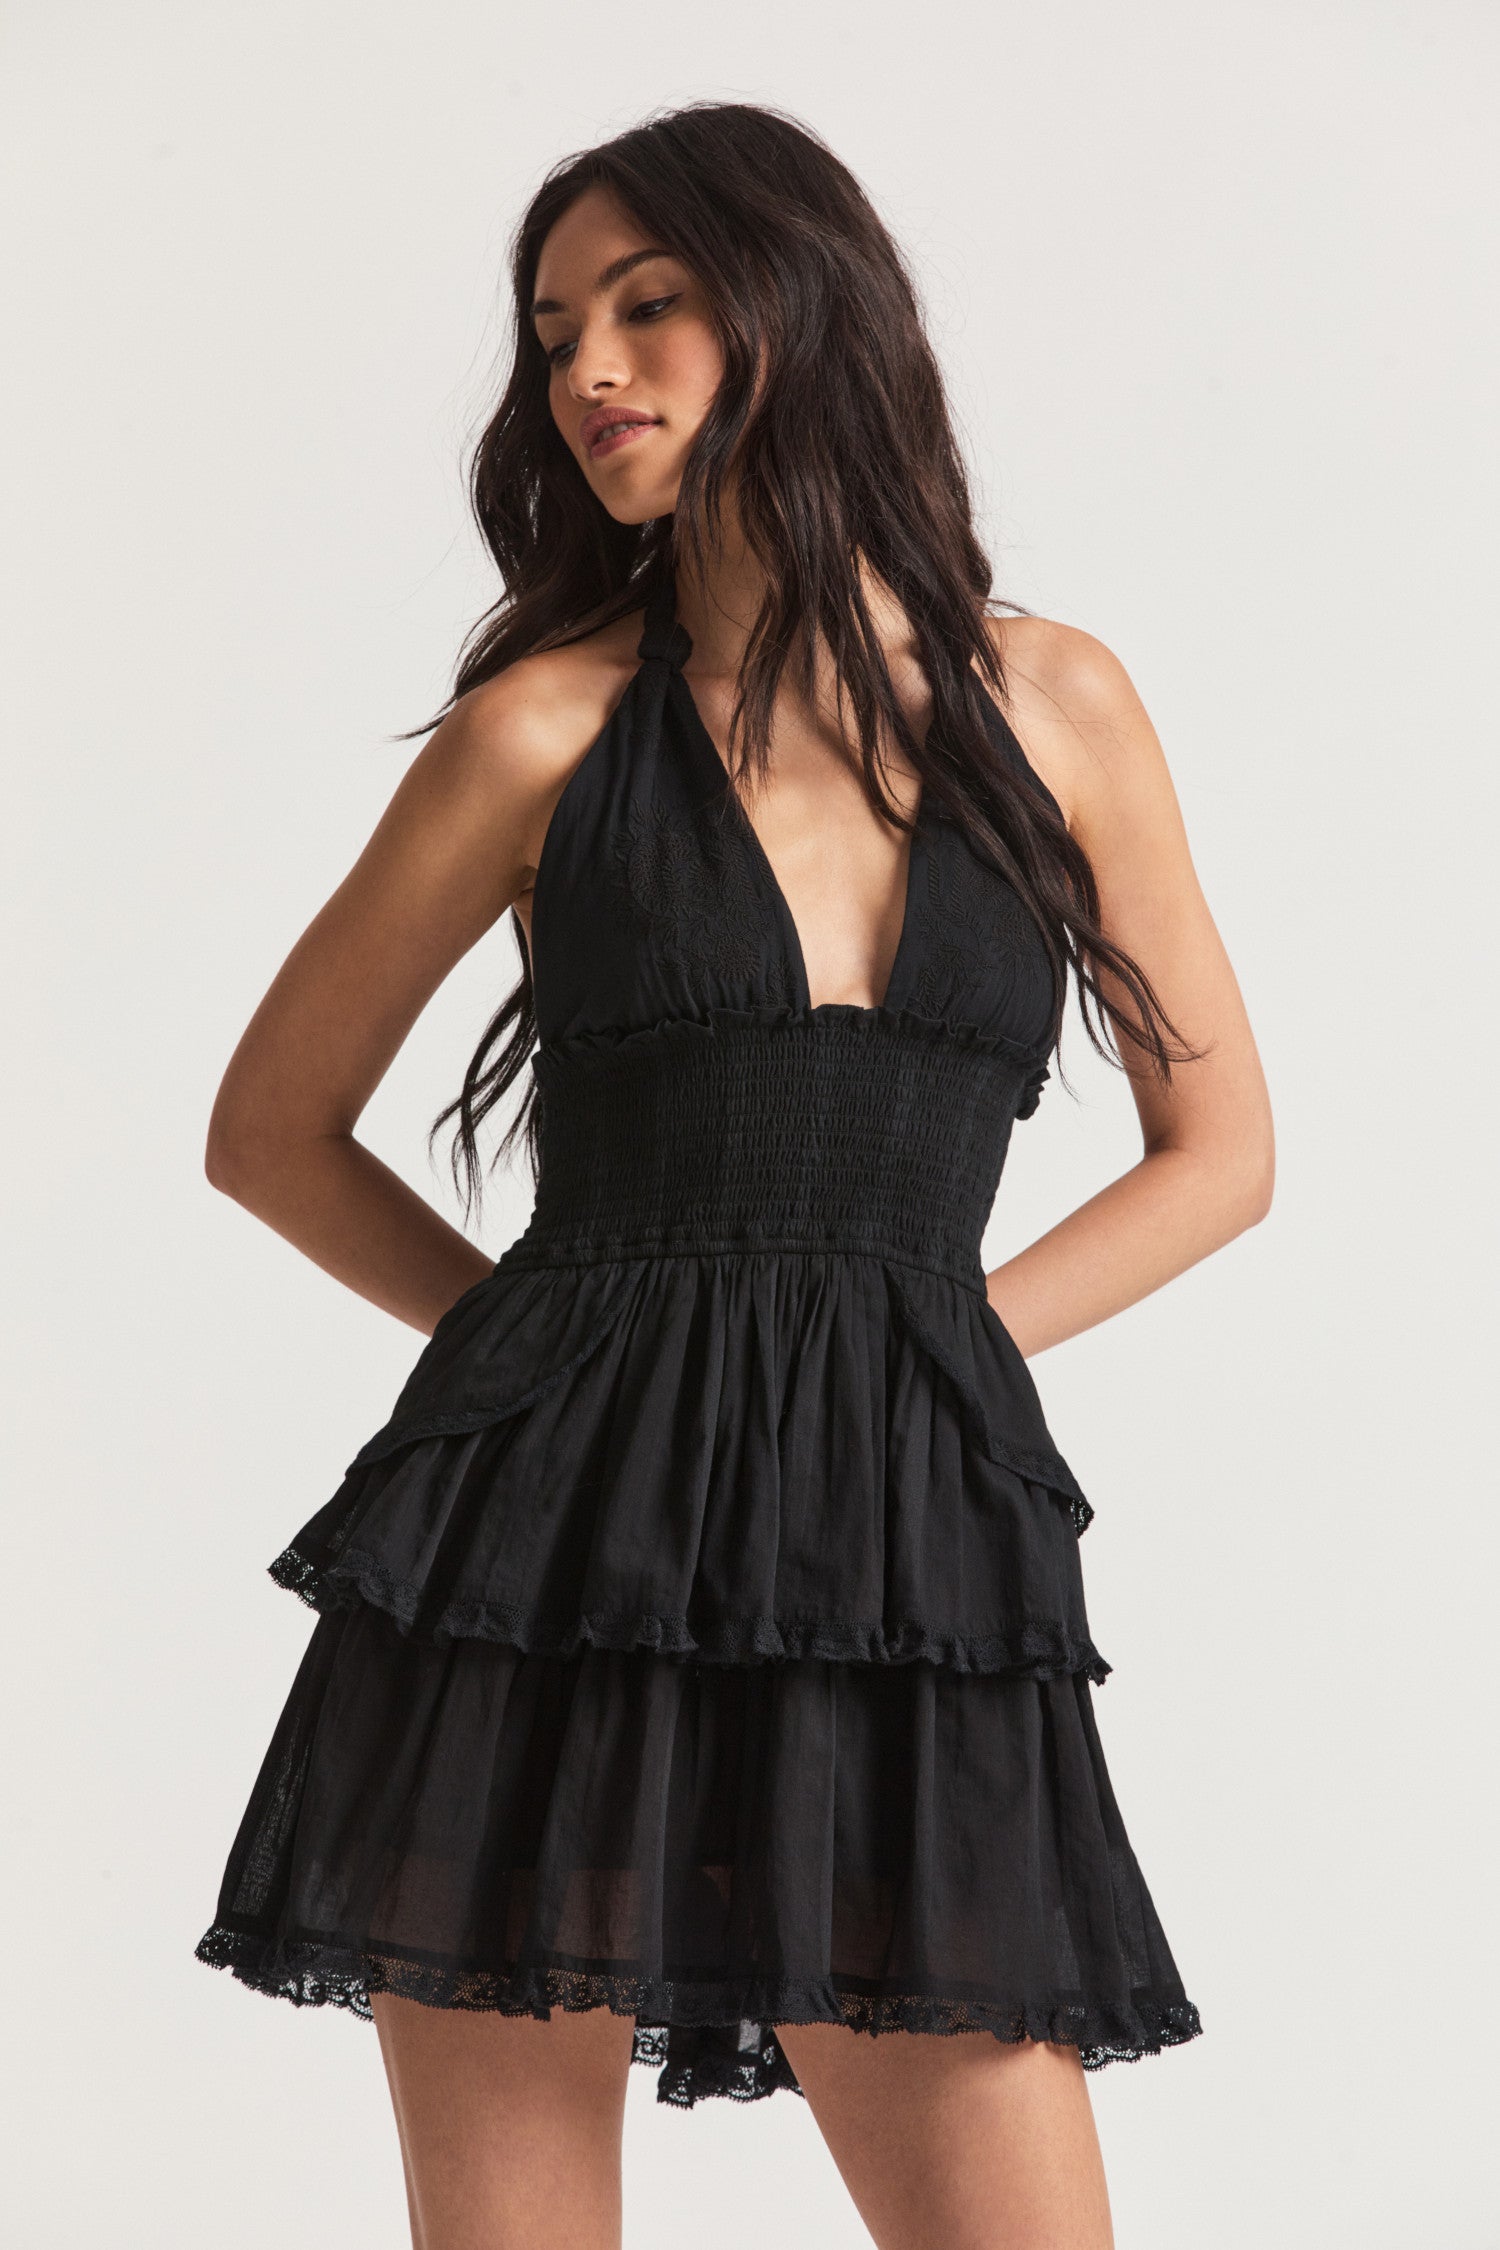 10 Cool And Classy Ways To Style A Halter Dress